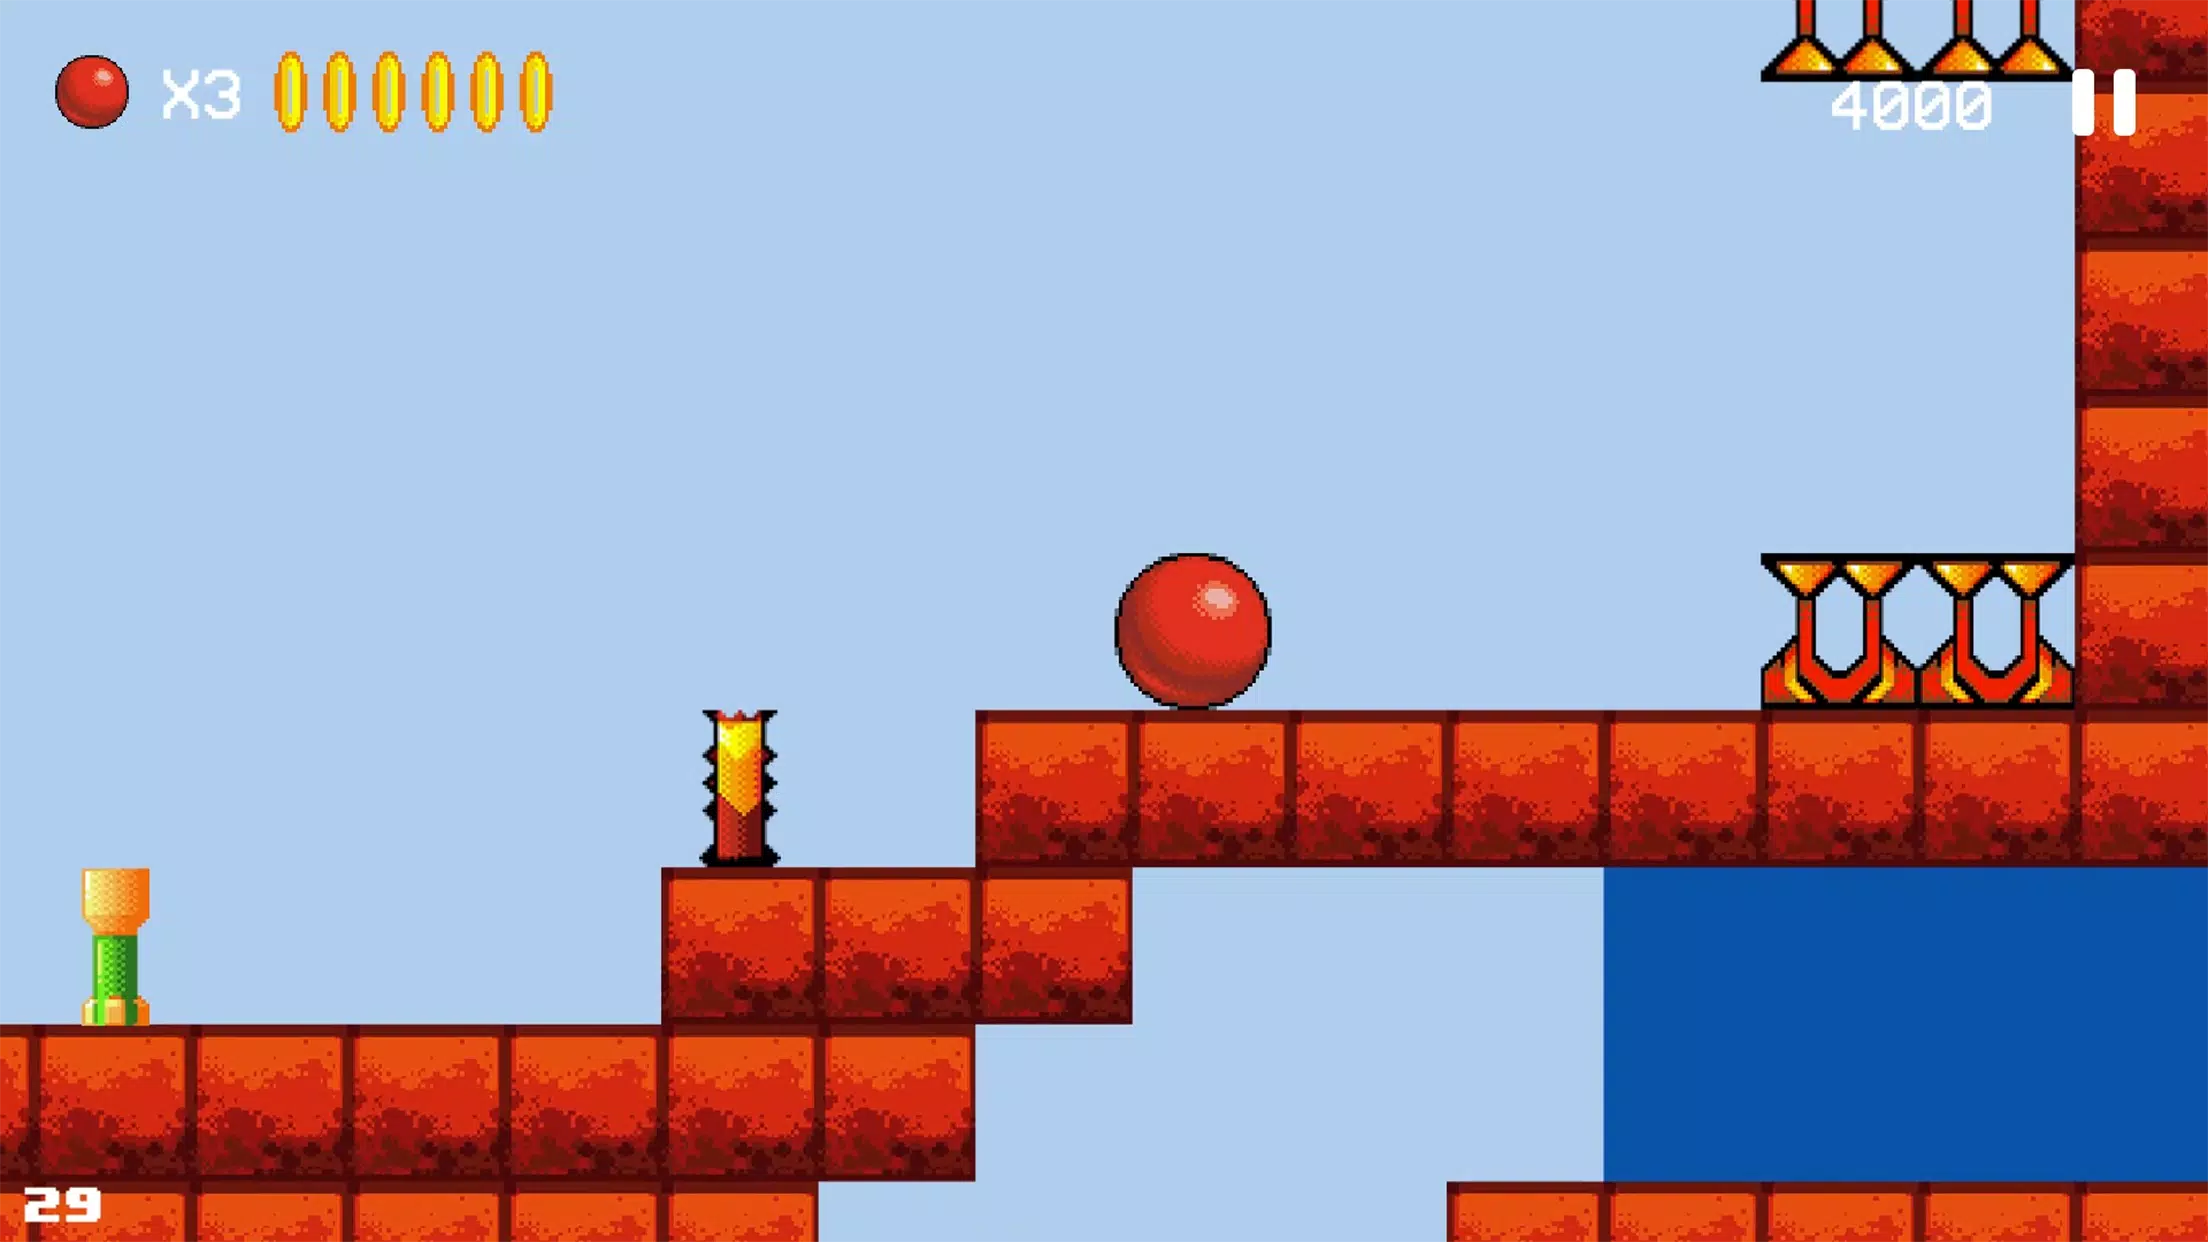 Download do APK de red ball Bounce Classic para Android